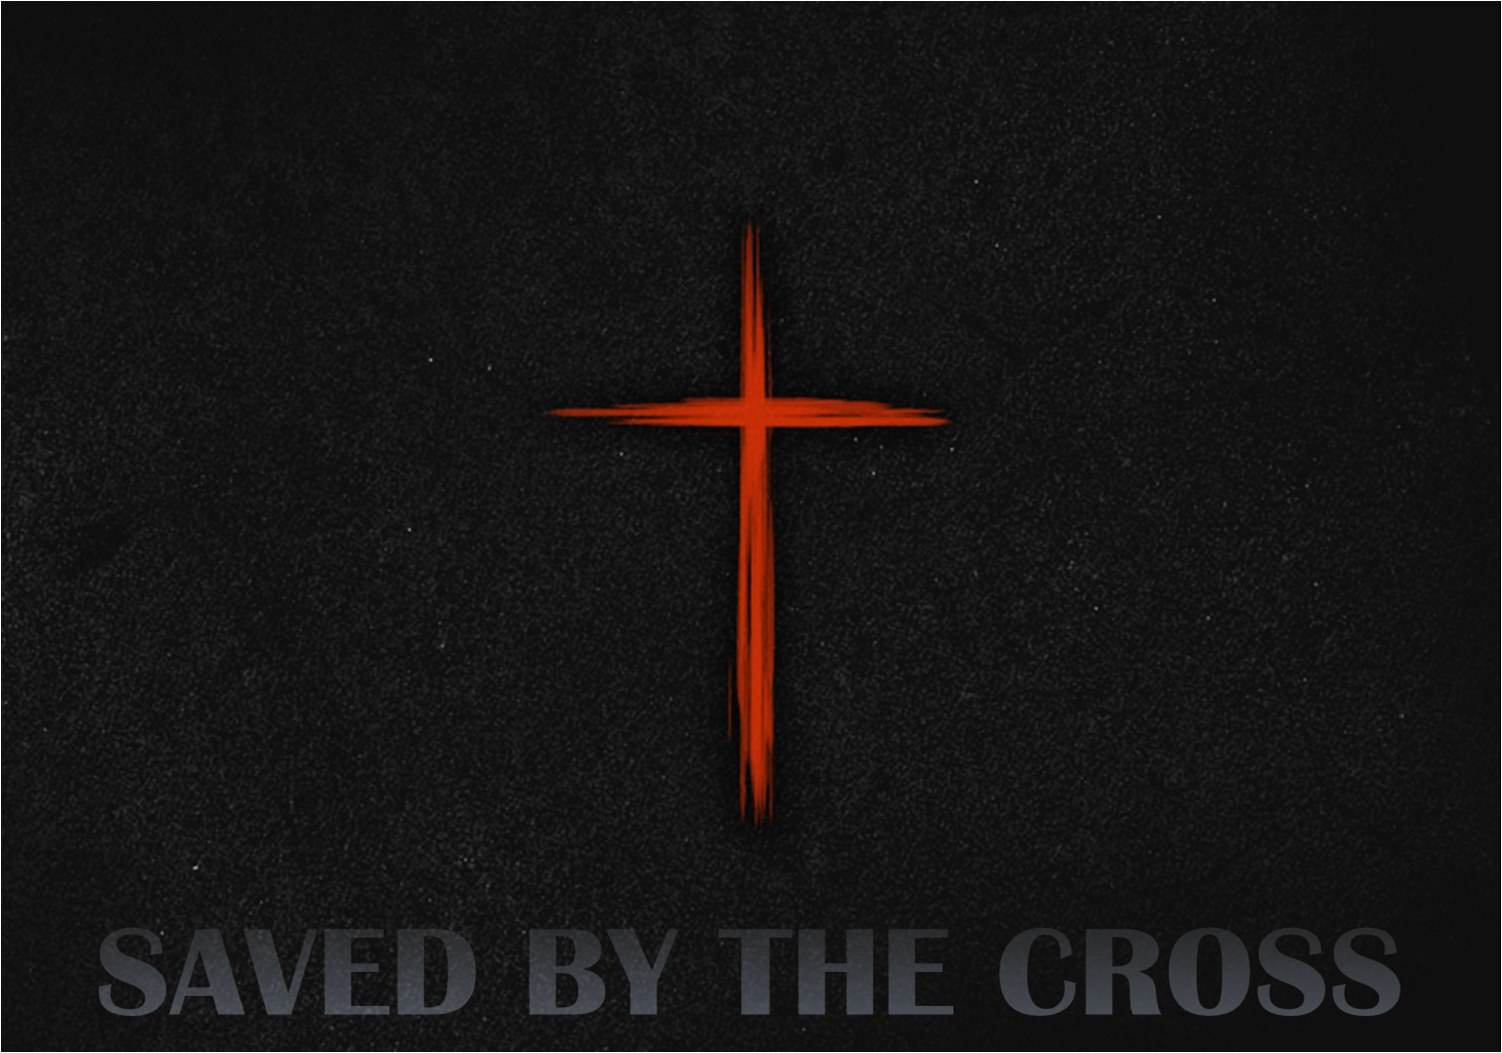 "Saved by the Cross"